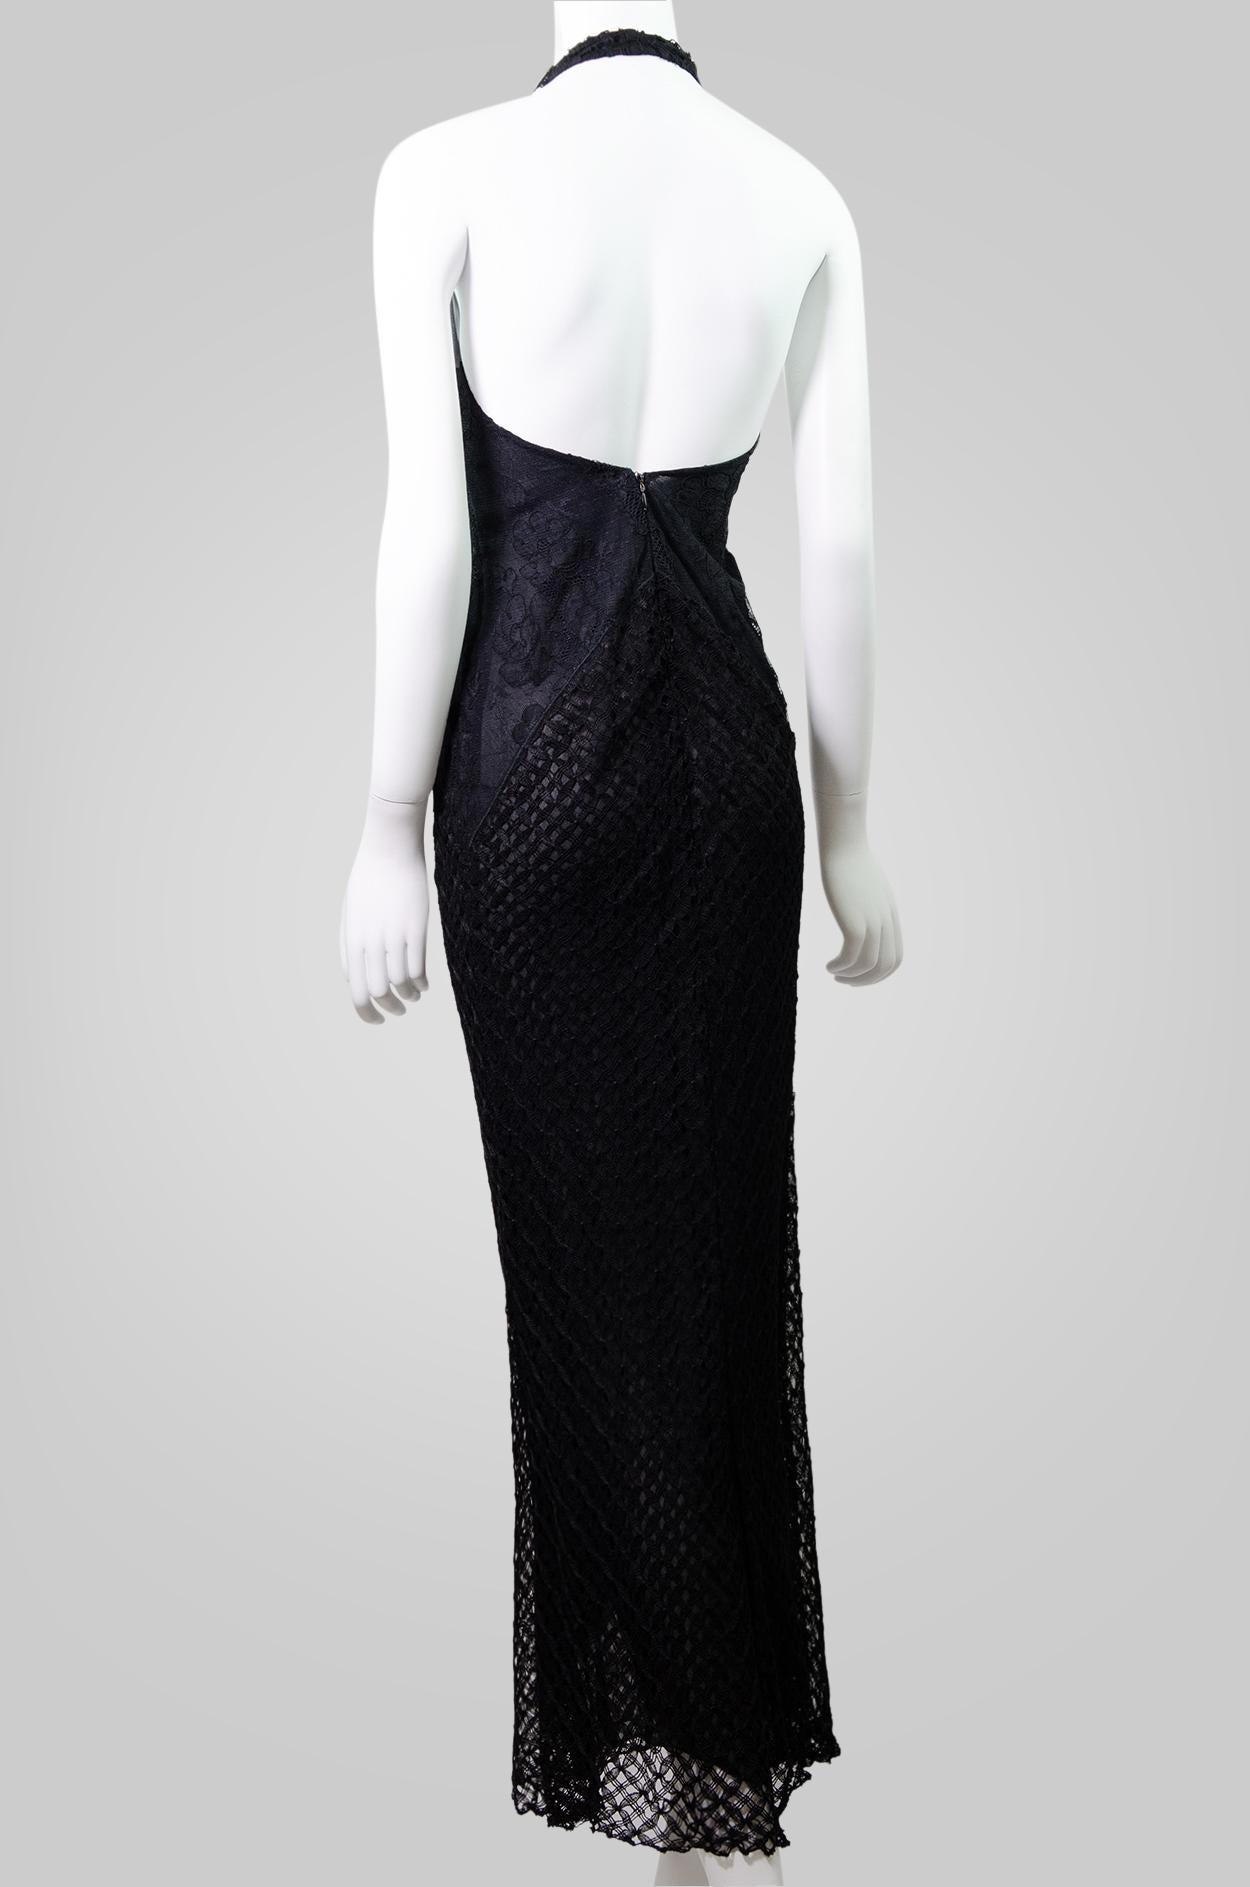 VERSACE S/S 2002 Vintage Sheer Lace Knit Gown  For Sale 1